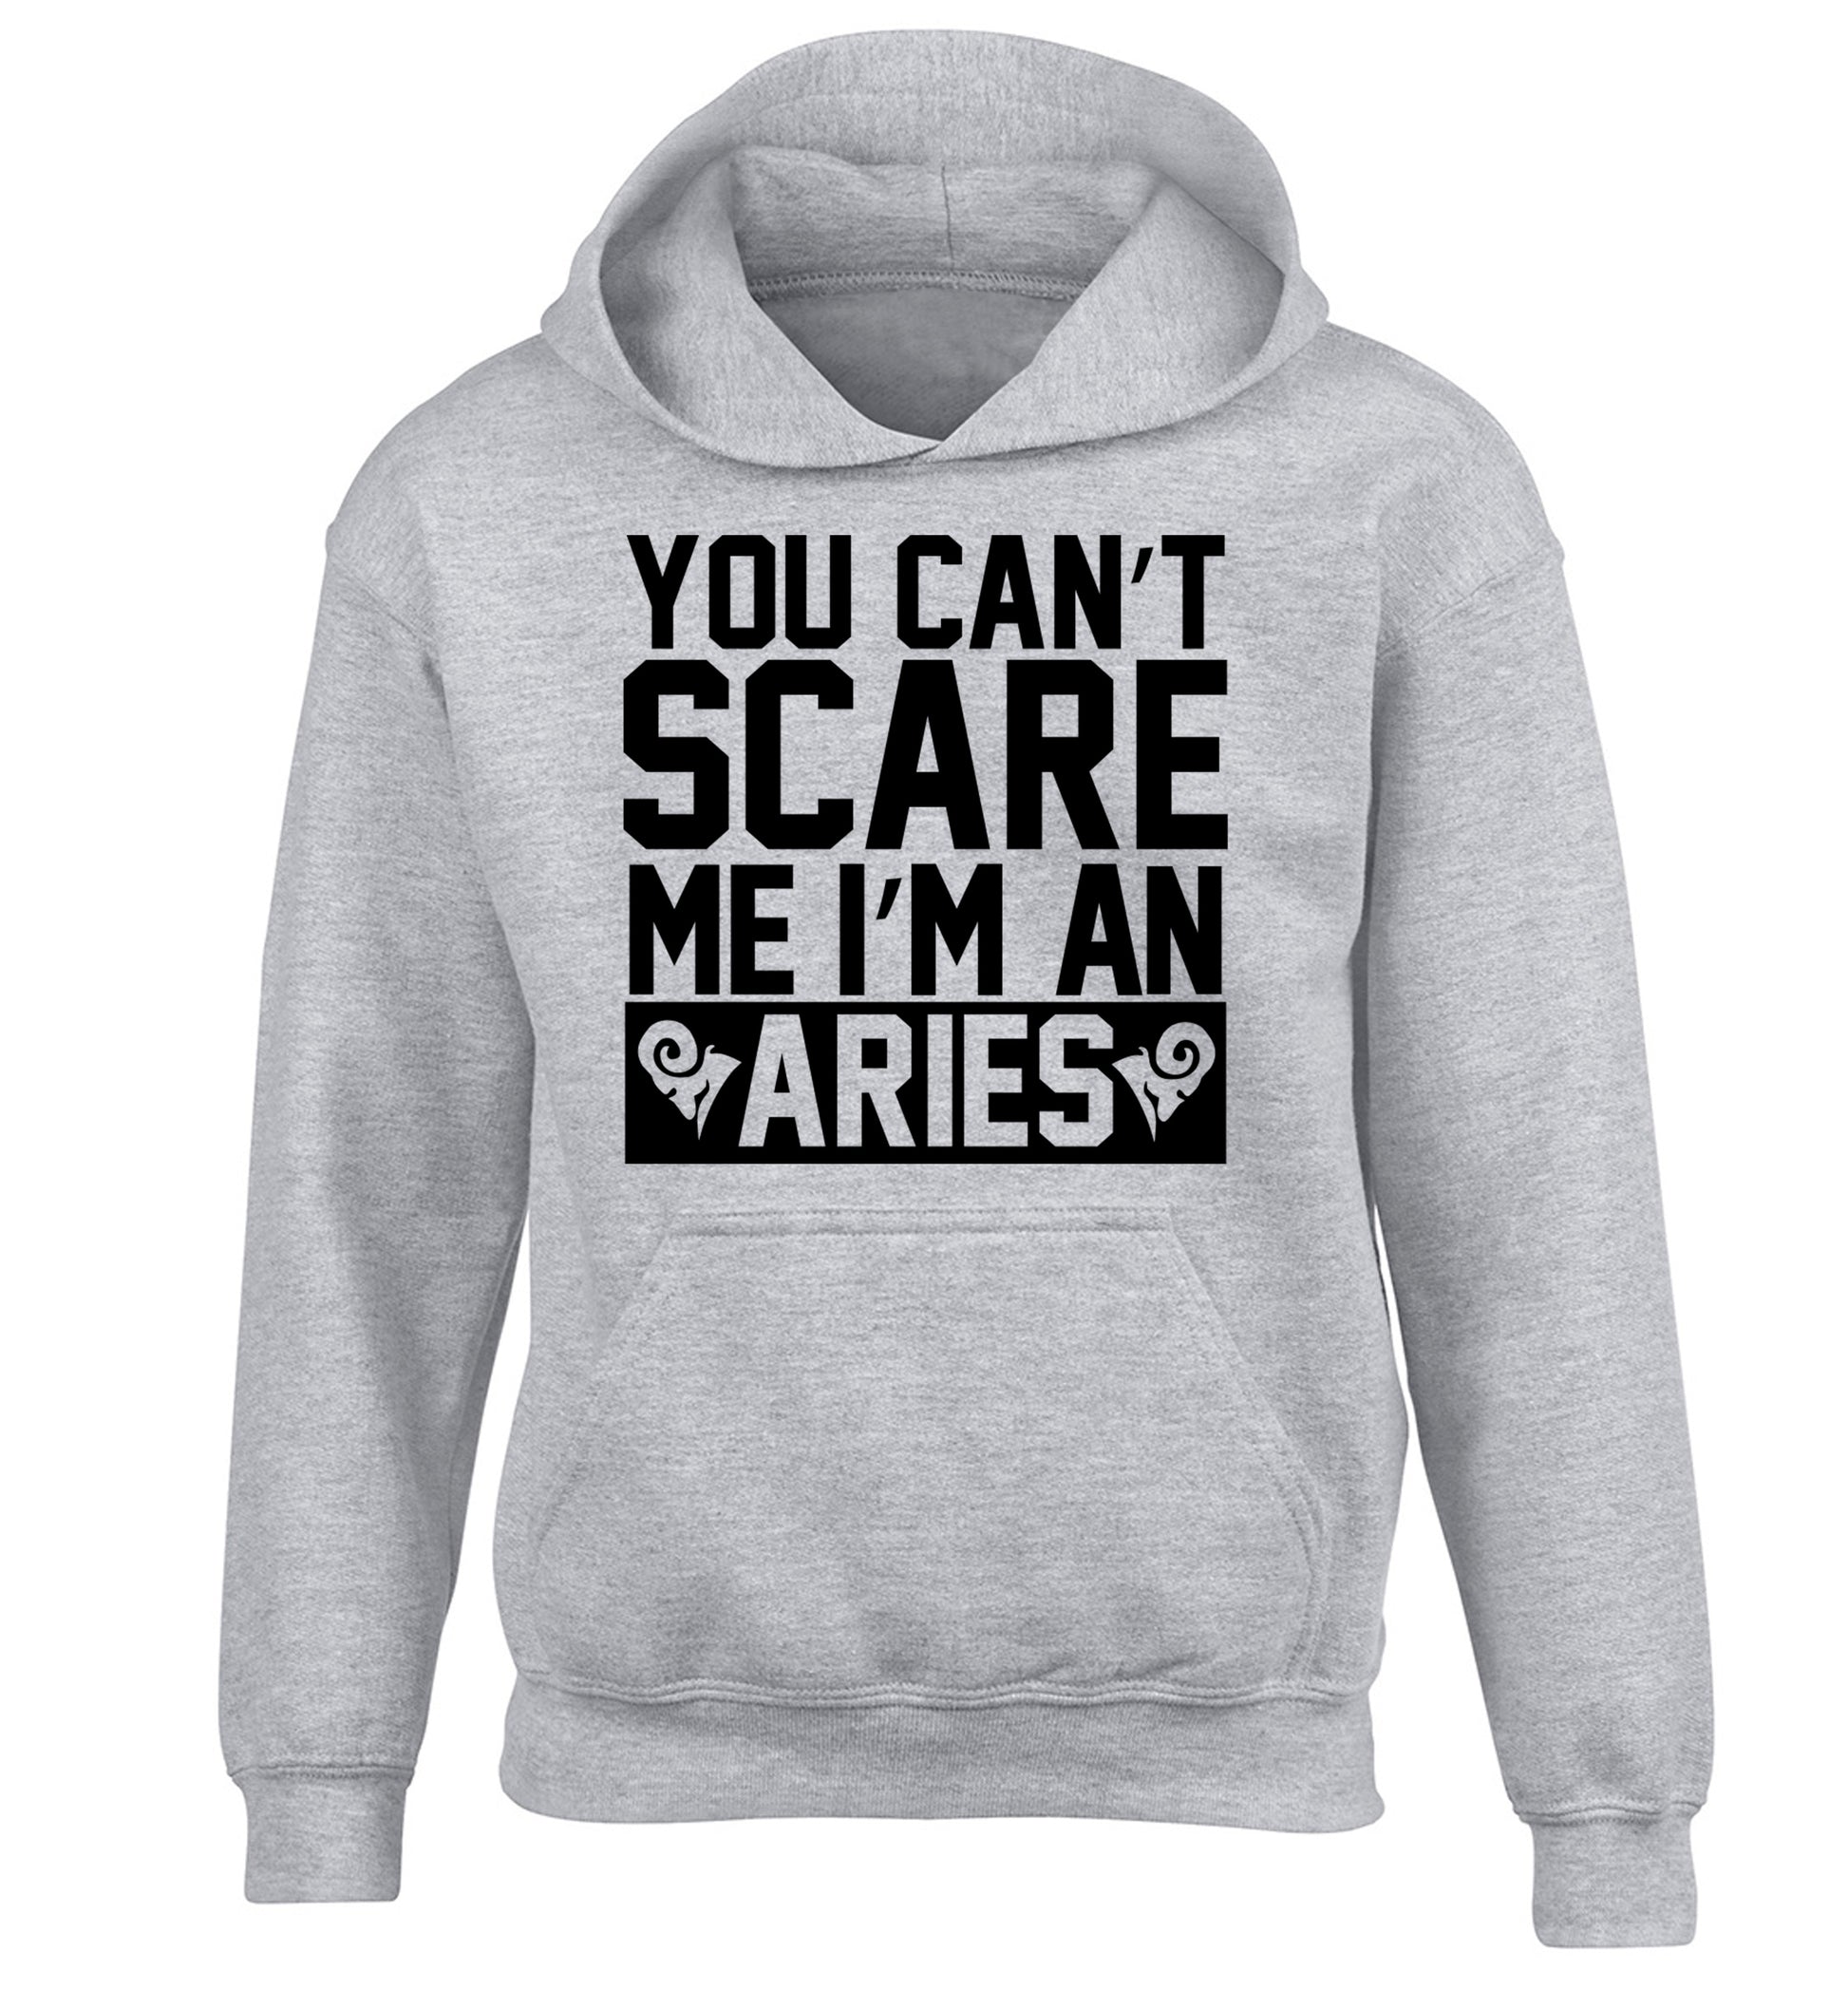 You can't scare me I'm an aries children's grey hoodie 12-13 Years